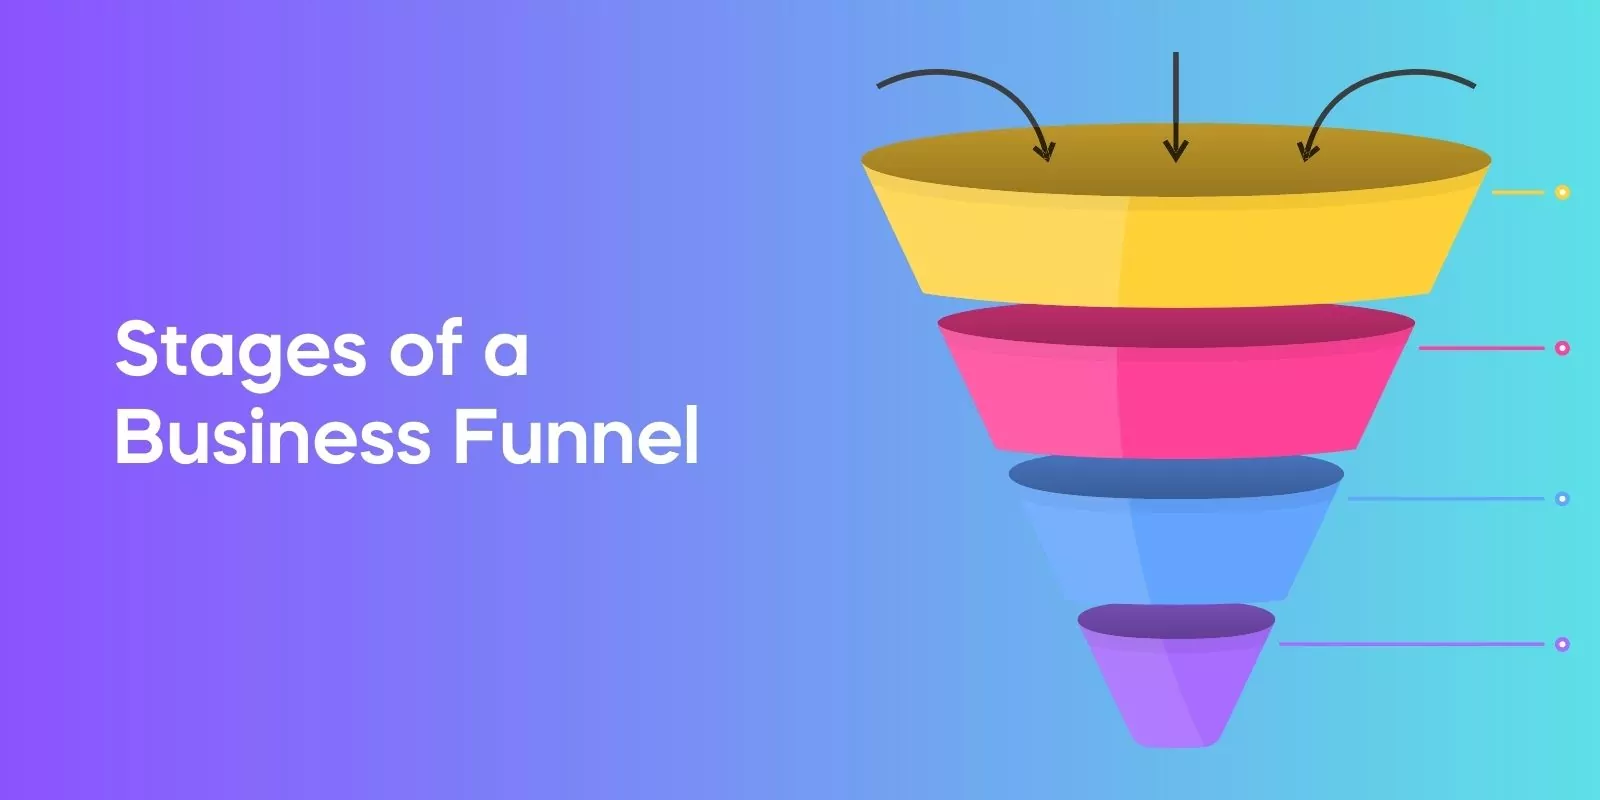 Stages of a Business Funnel